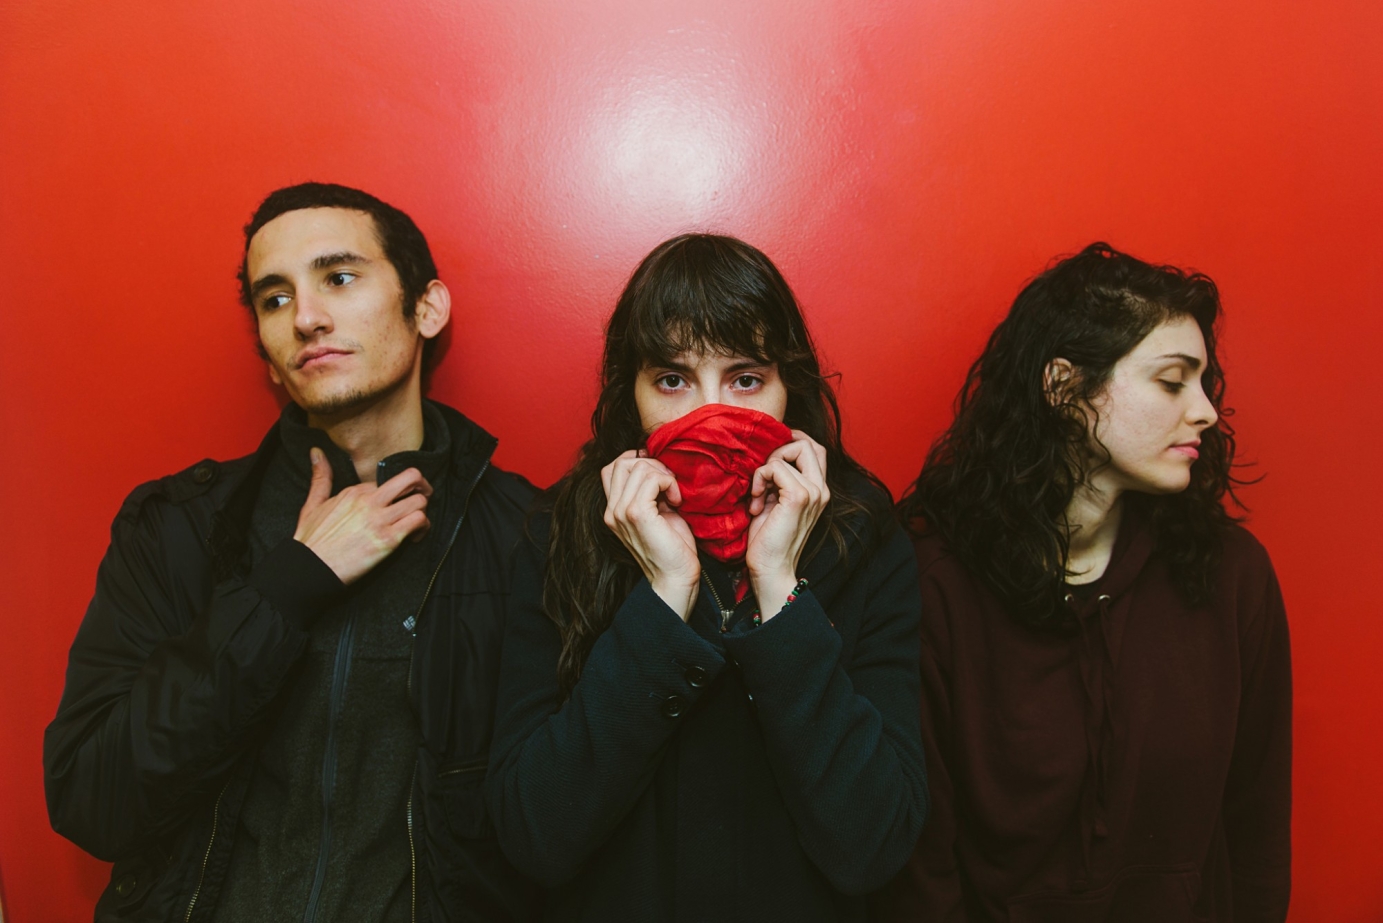 Photography for Le Butcherettes by Andy Sawyer